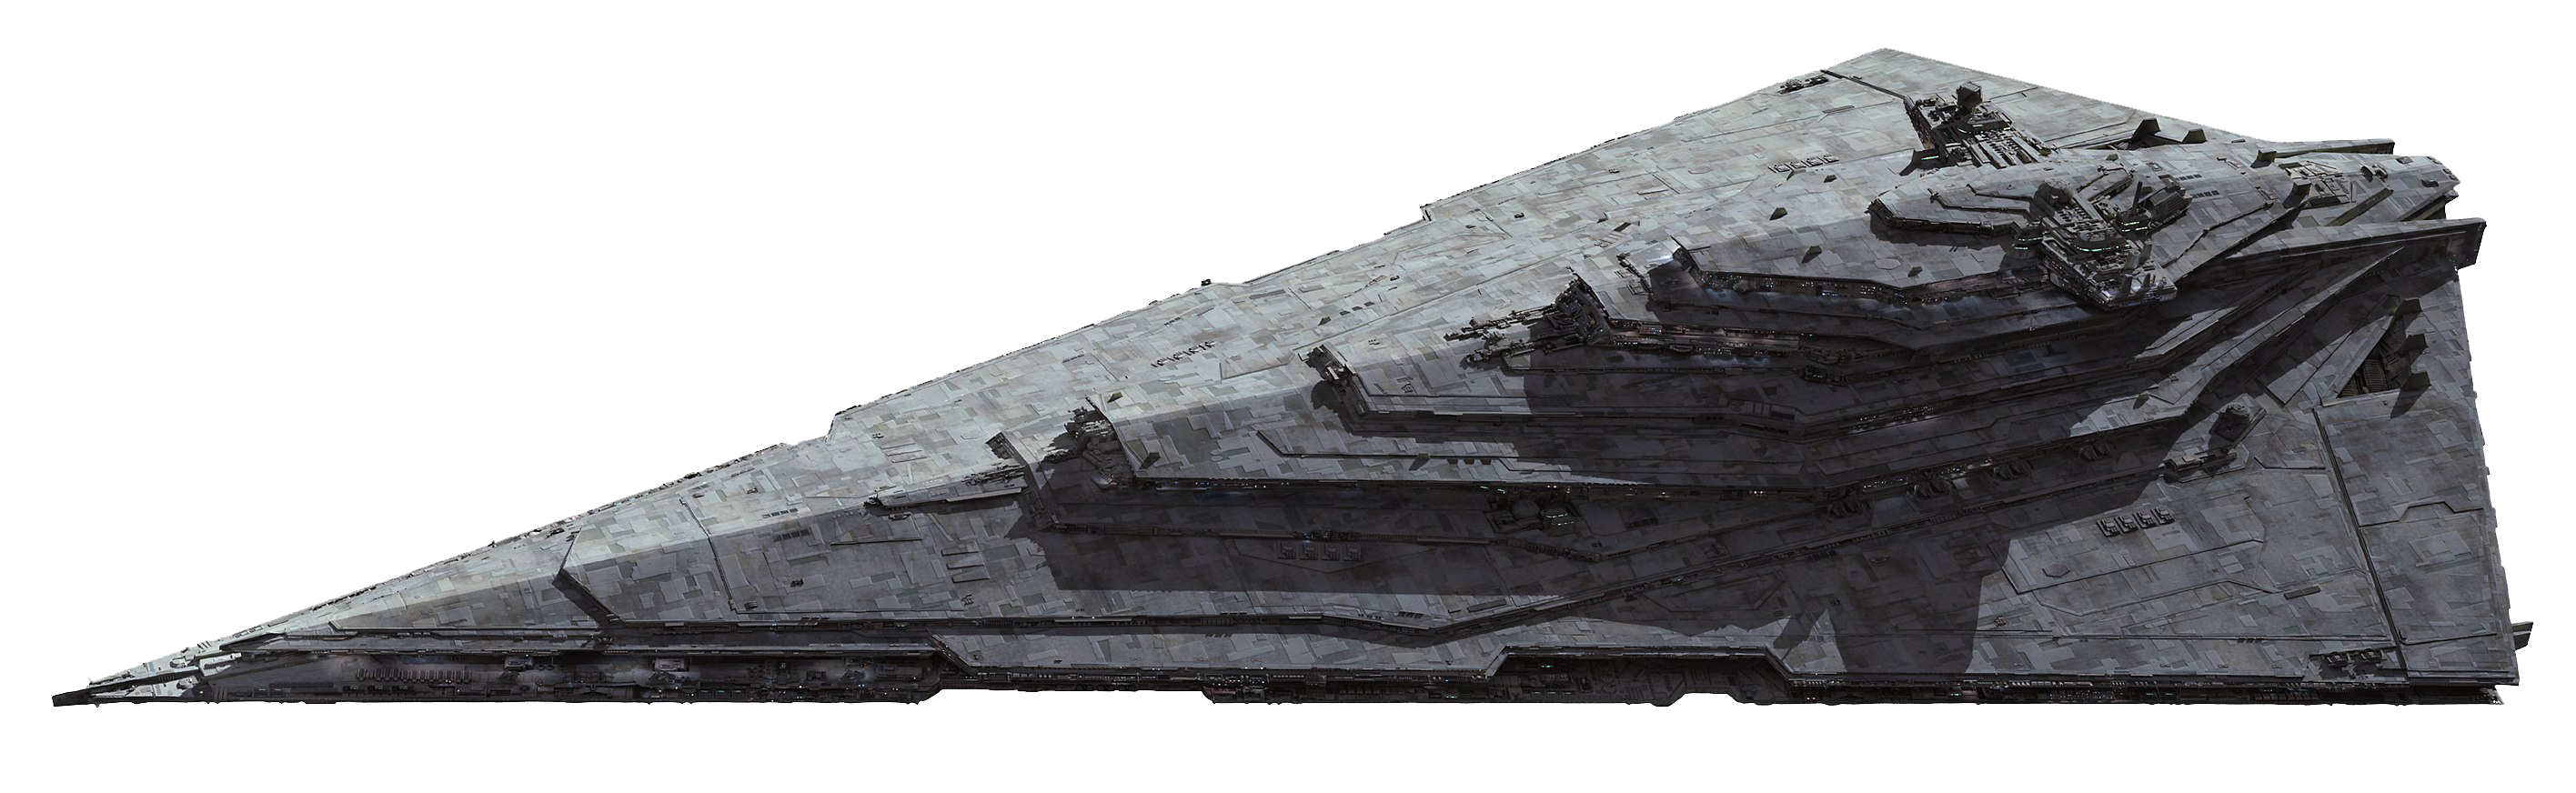 Star Destroyer PNG Imags HD